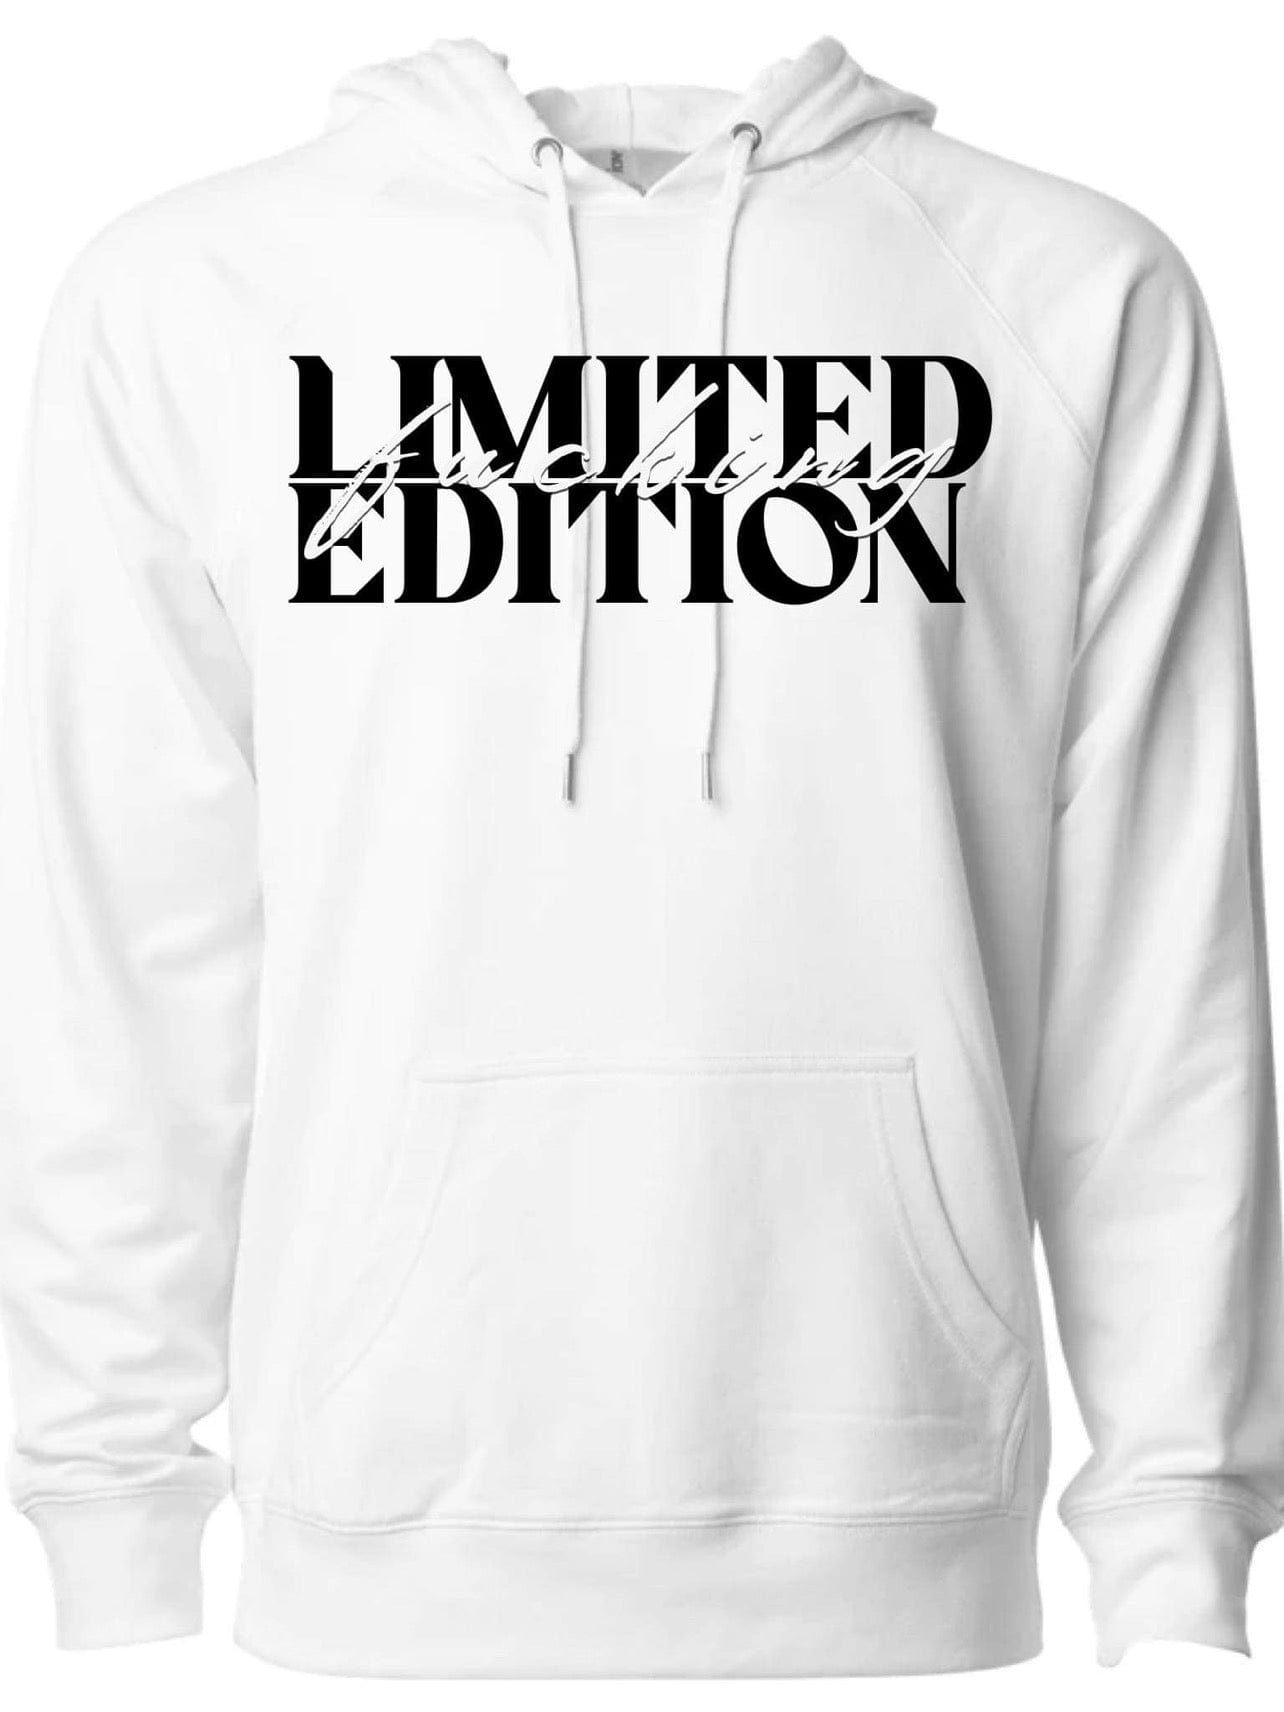 InsensitiviTees Shirts S / White Limited Fucking Edition Hoodie